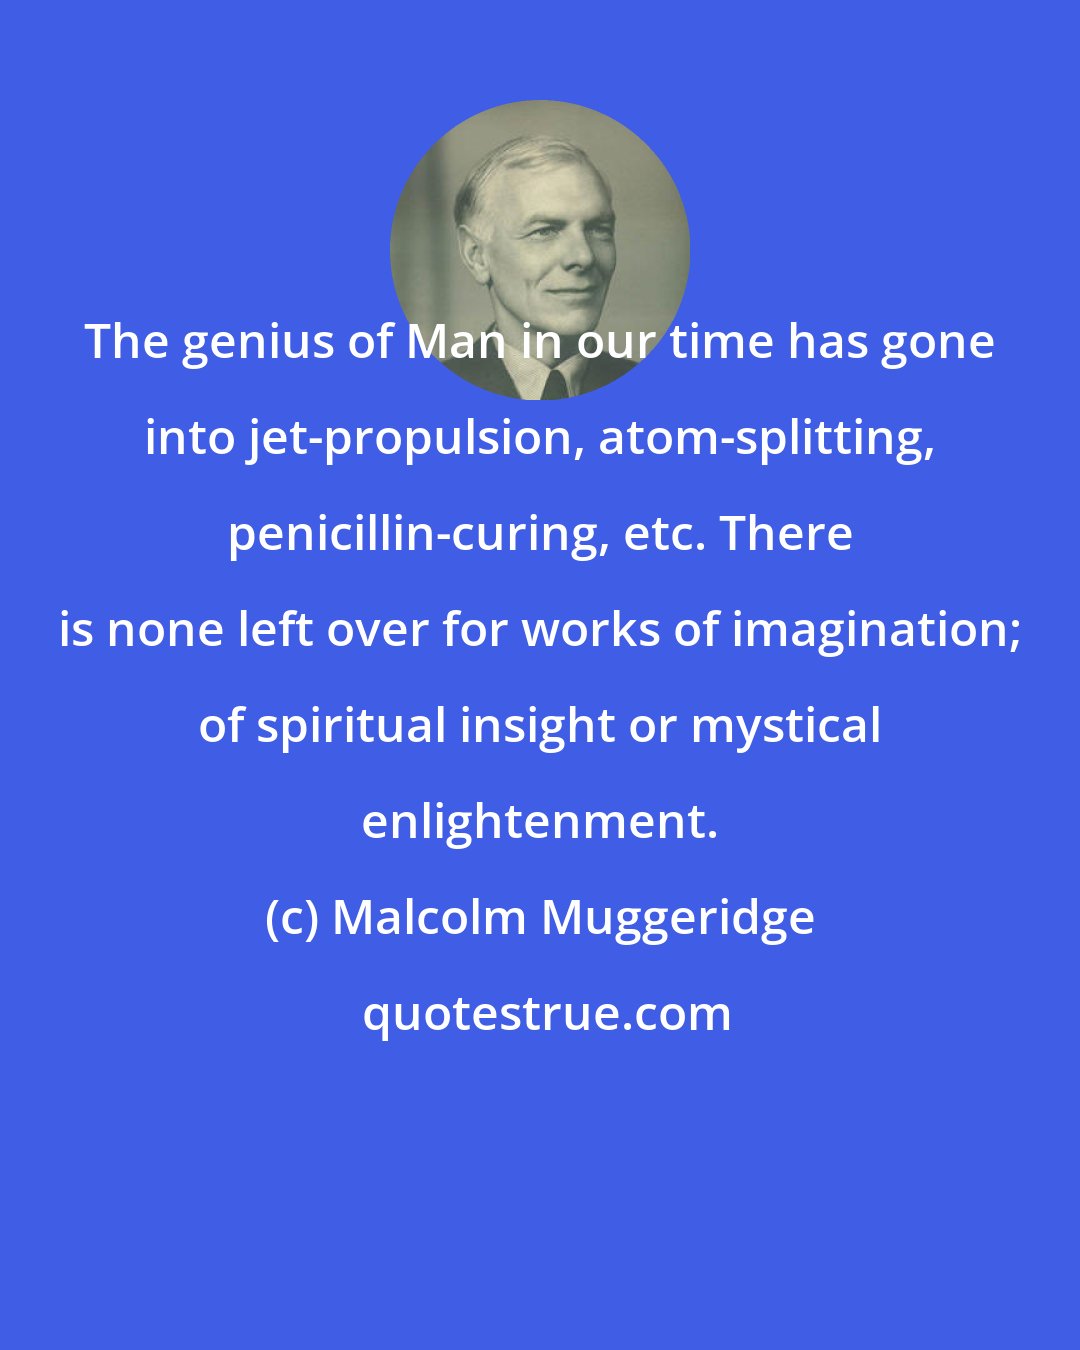 Malcolm Muggeridge: The genius of Man in our time has gone into jet-propulsion, atom-splitting, penicillin-curing, etc. There is none left over for works of imagination; of spiritual insight or mystical enlightenment.